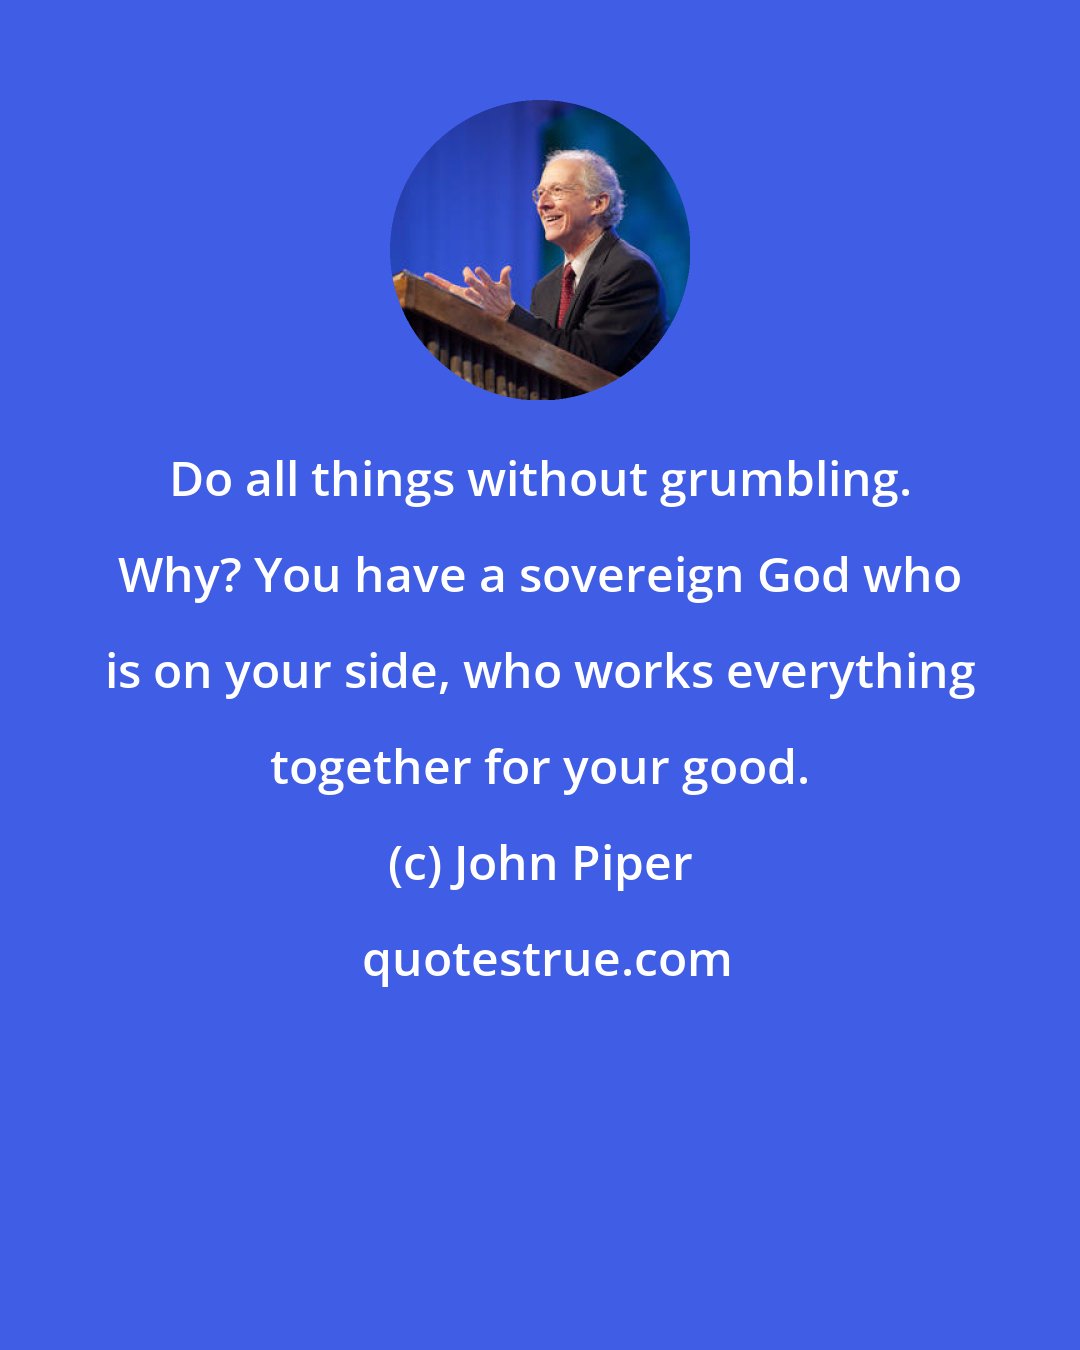 John Piper: Do all things without grumbling. Why? You have a sovereign God who is on your side, who works everything together for your good.